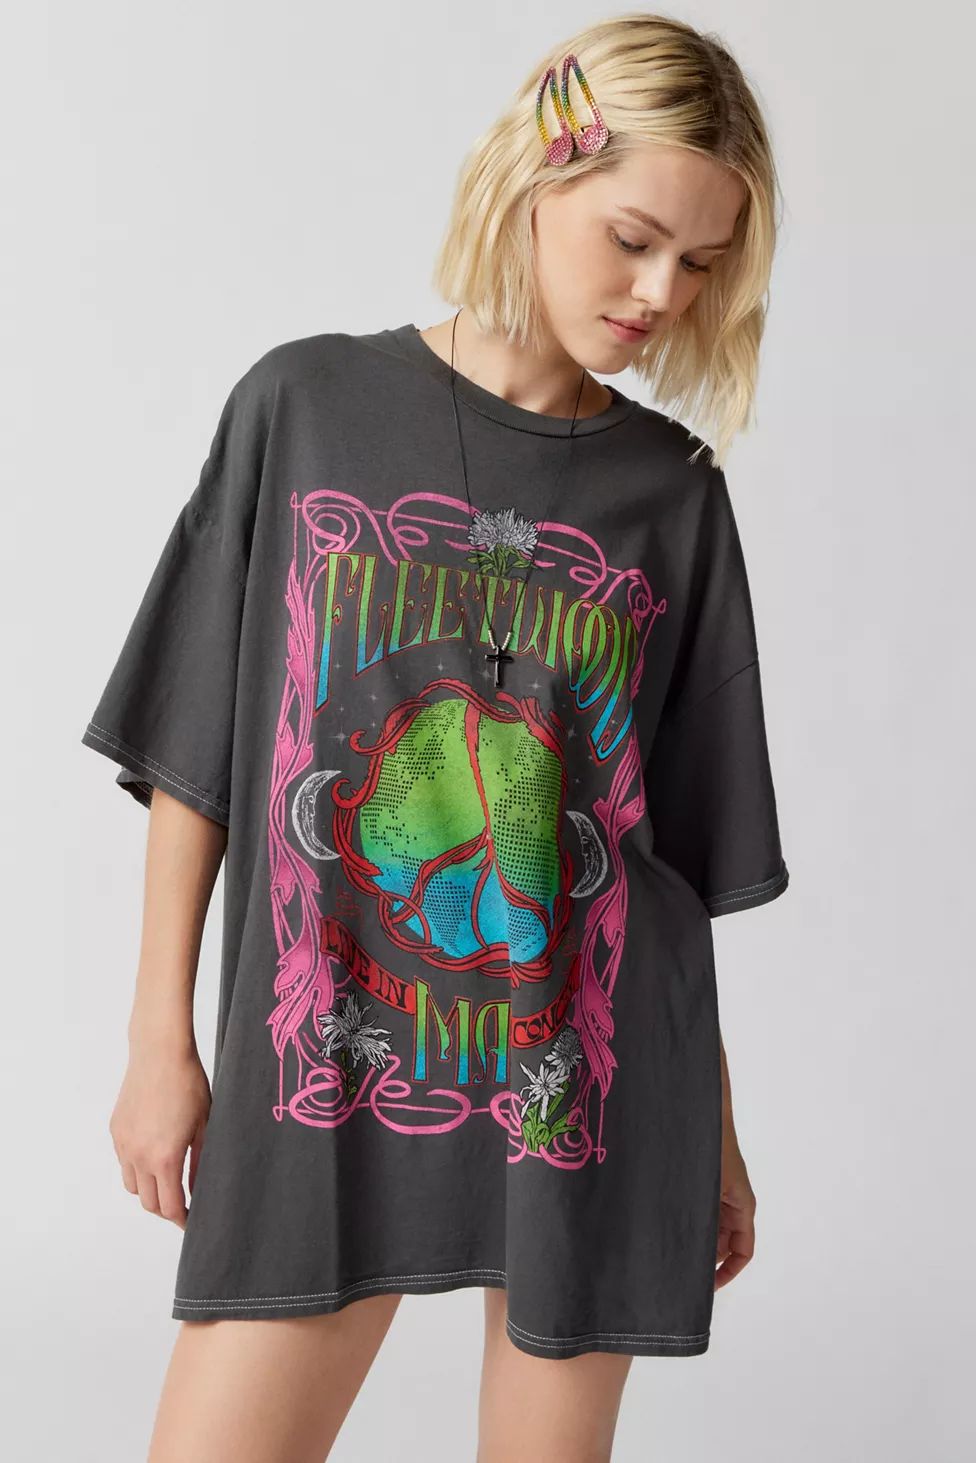 Fleetwood Mac T-Shirt Dress | Urban Outfitters (US and RoW)